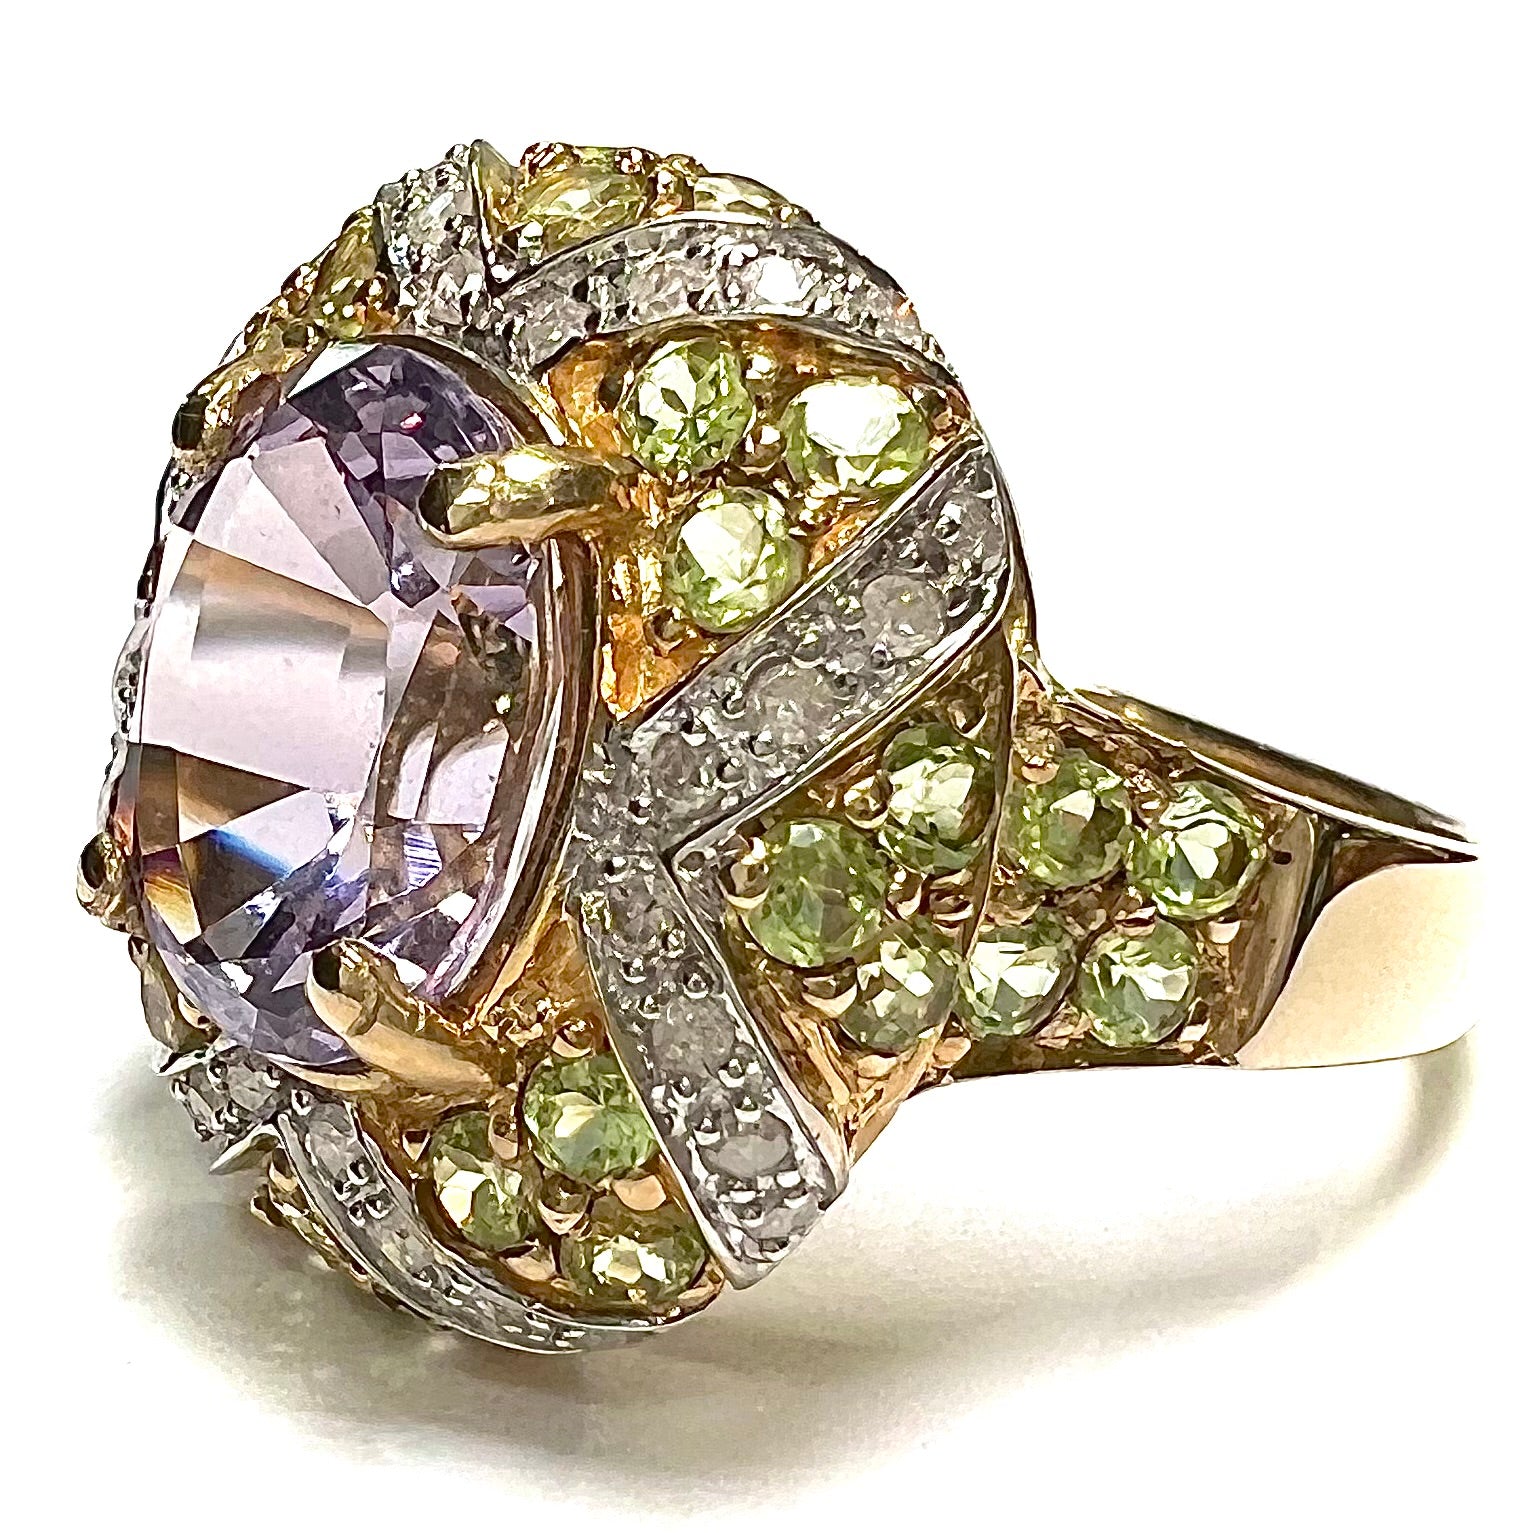 A ladies' yellow gold ring set with an oval cut lavender spinel center stone and diamond and peridot accent stones.